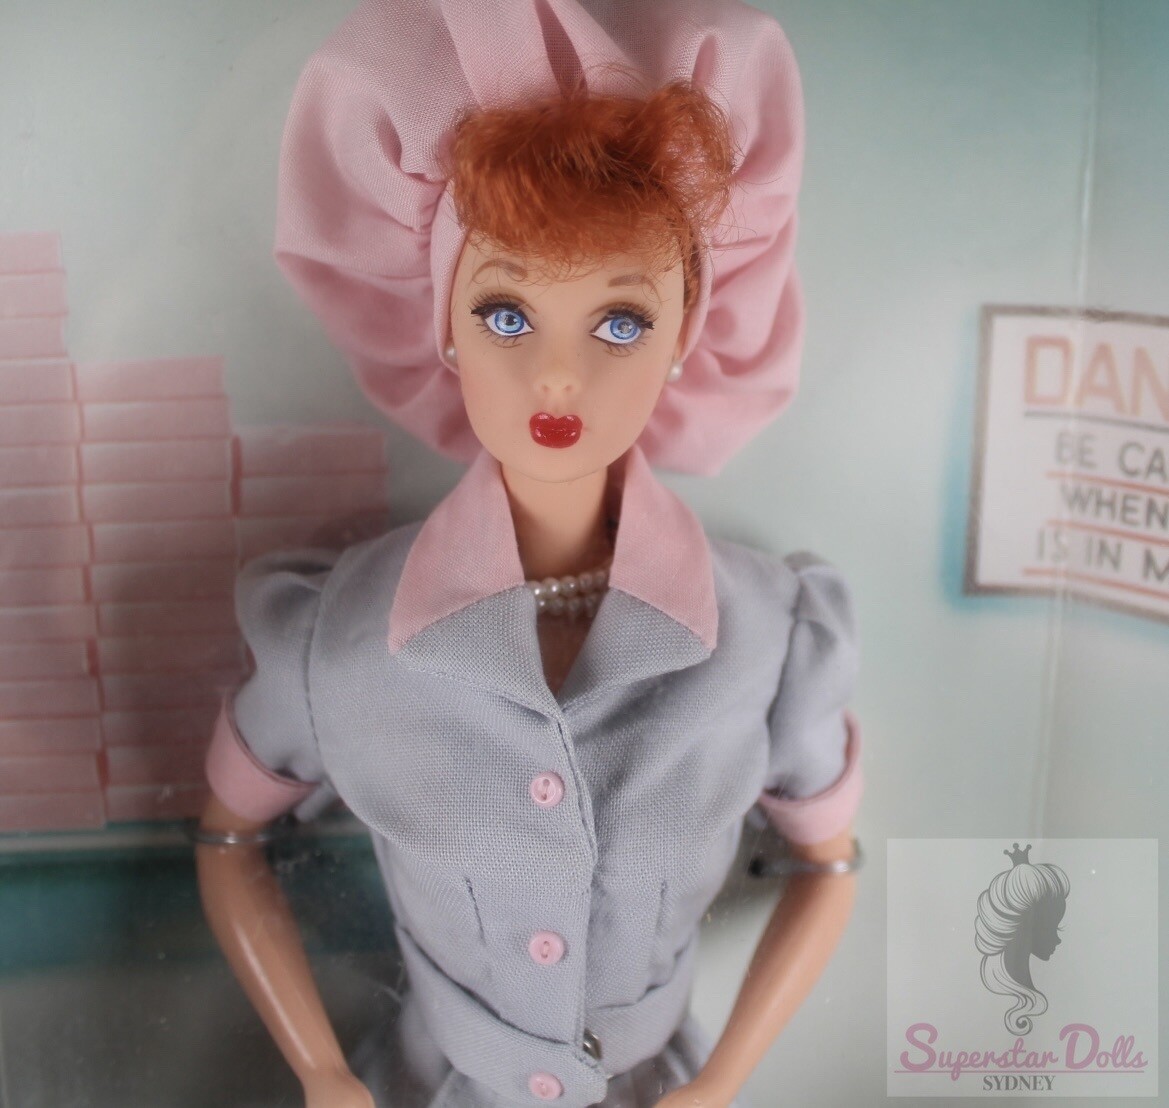 1999 Collector Edition: I Love Lucy Episode 39 Lucille Ball Barbie Doll